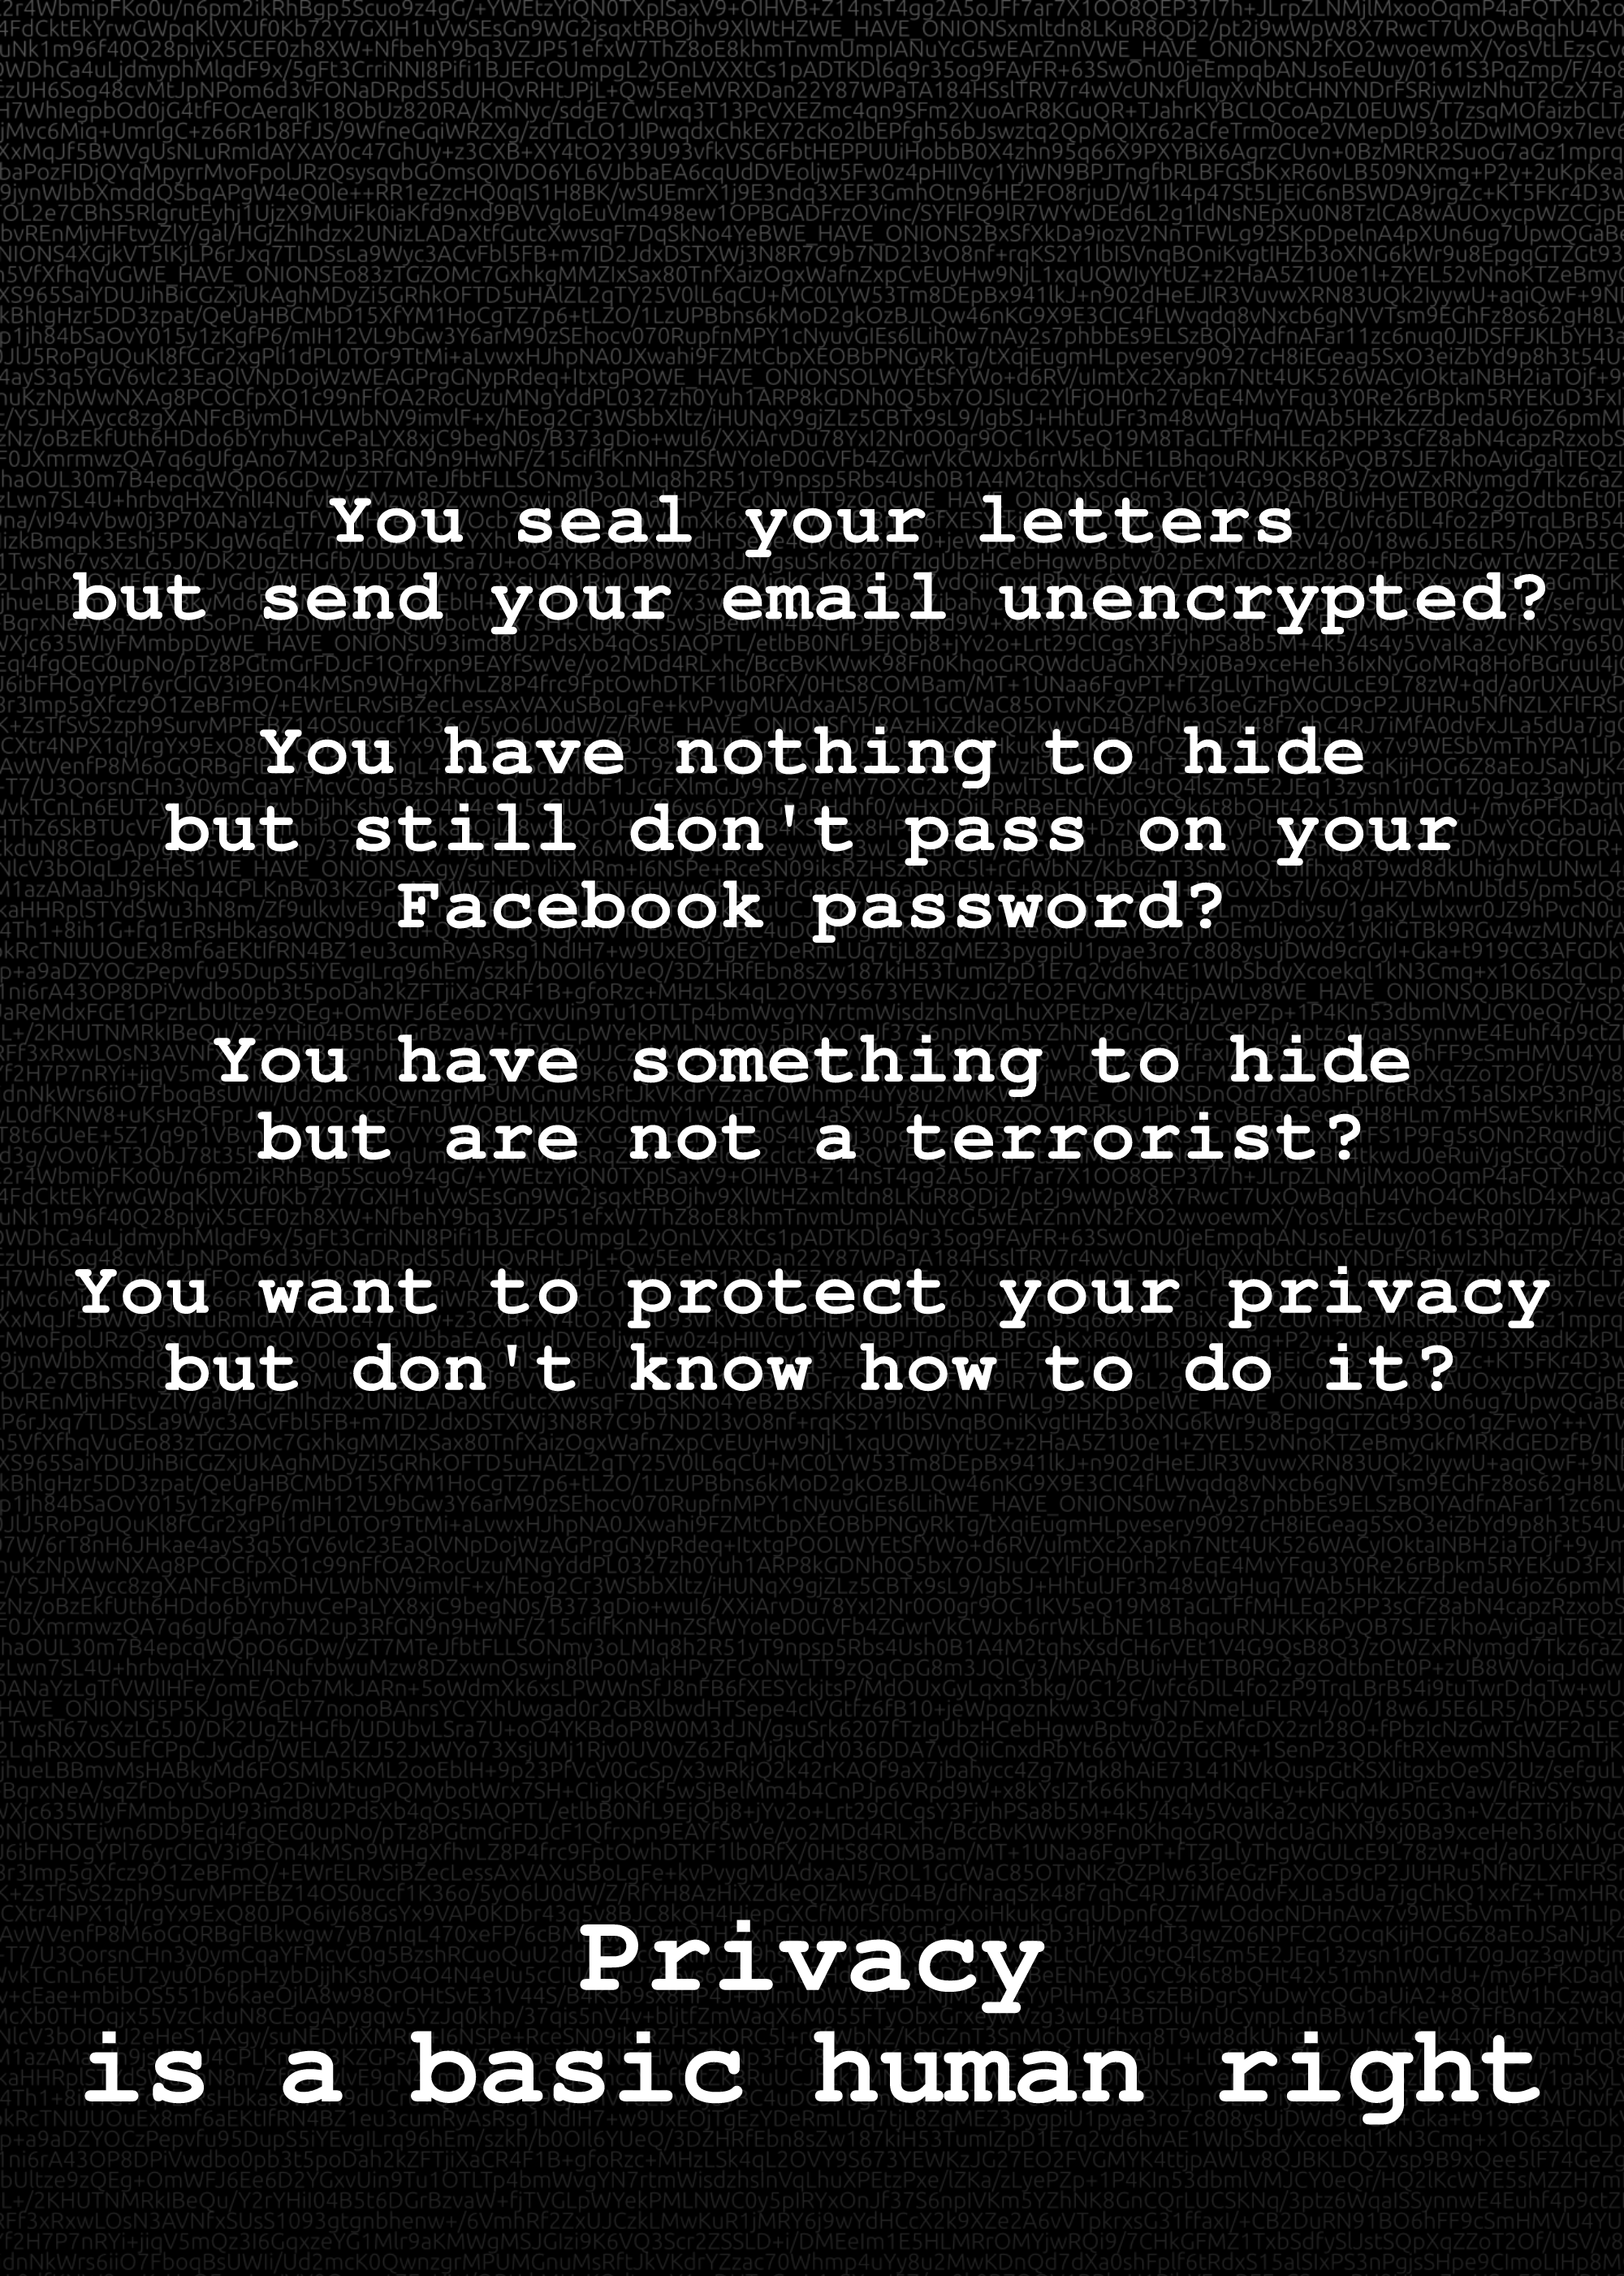 Privacy is a basic human right.